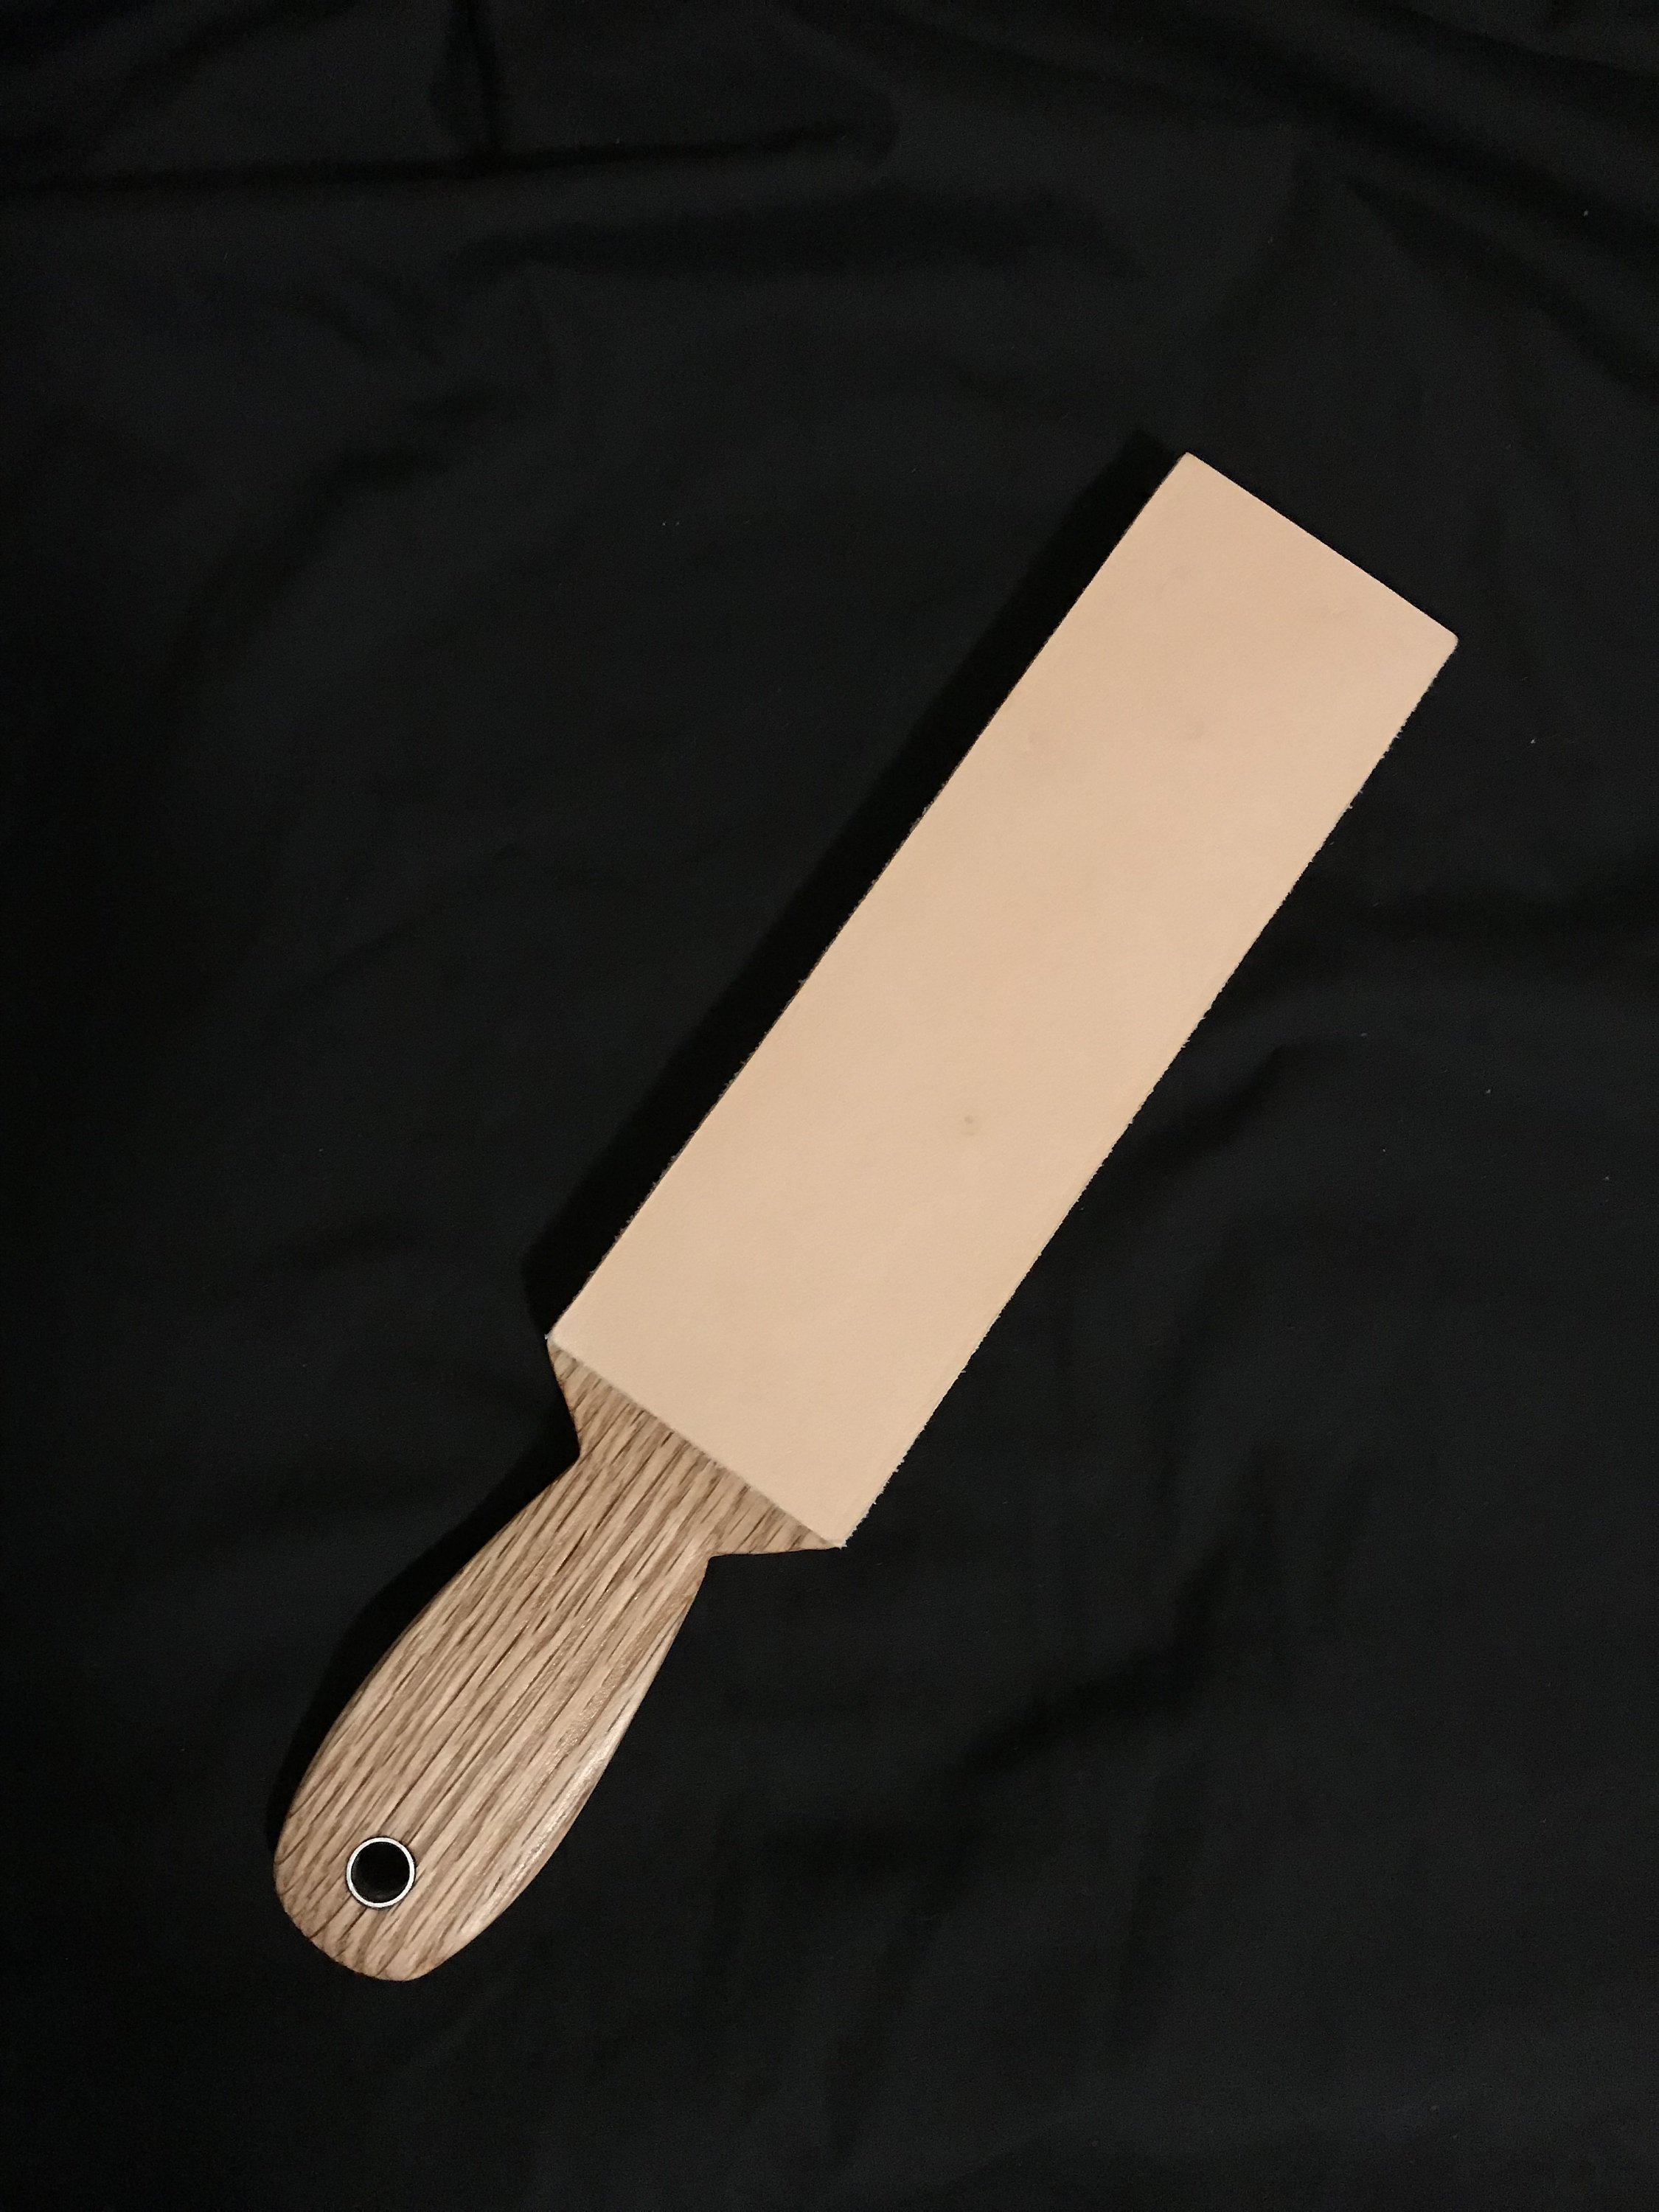 Semicircular Double-sided leather strop for sharpening - The Spoon Crank